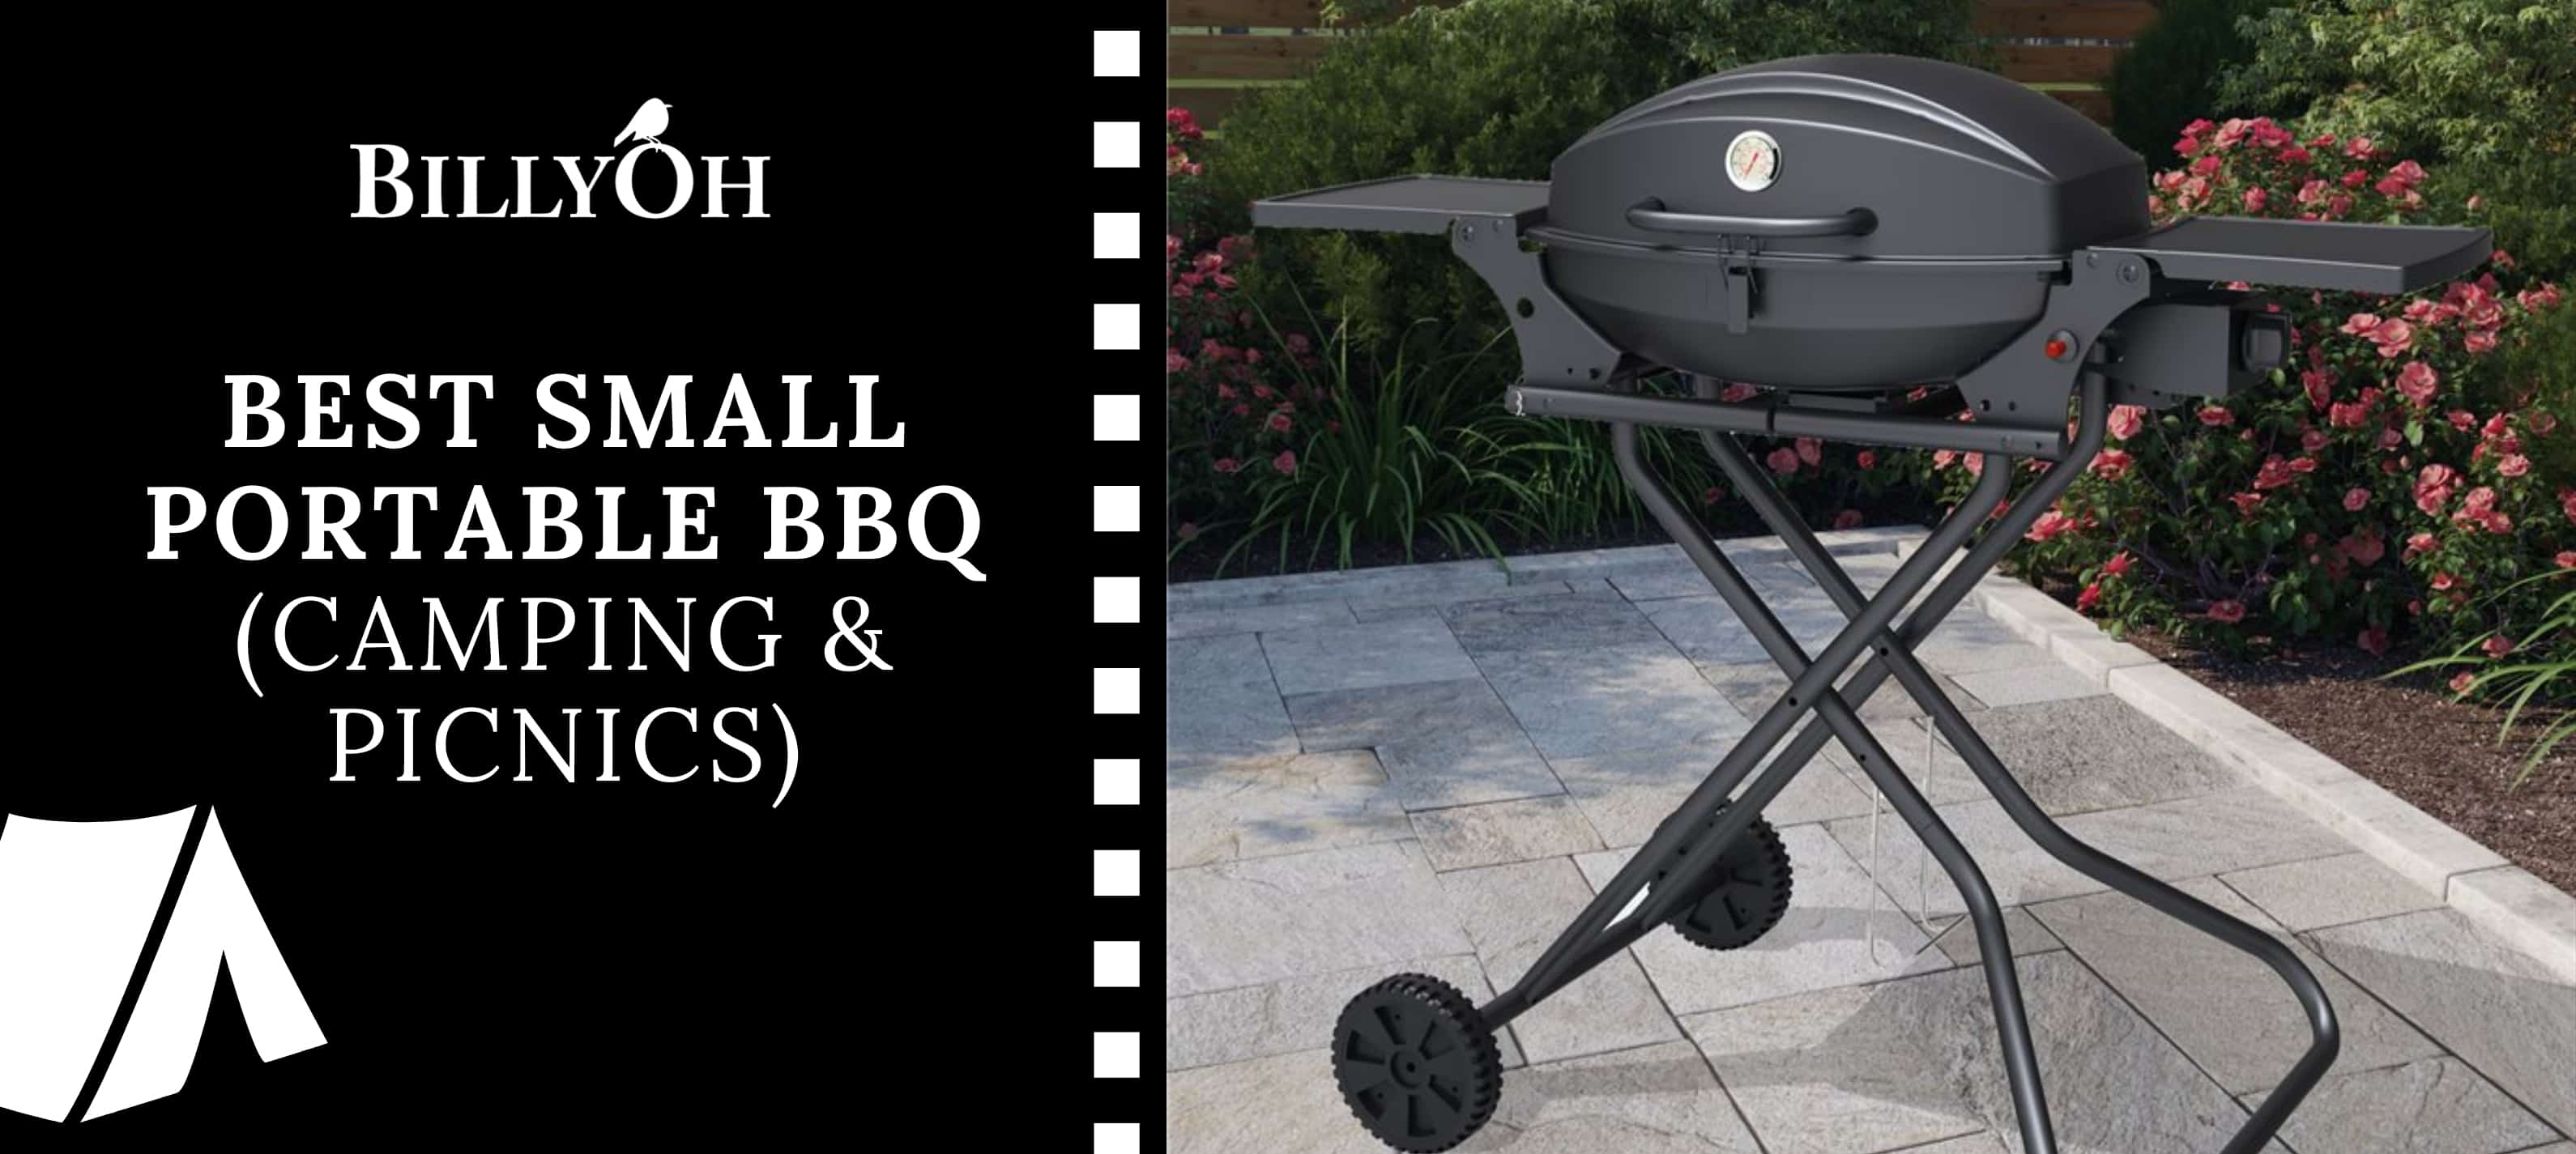 BillyOh Tennessee Portable BBq with 'Best Small Portable BBQ' banner and BillyOh logo